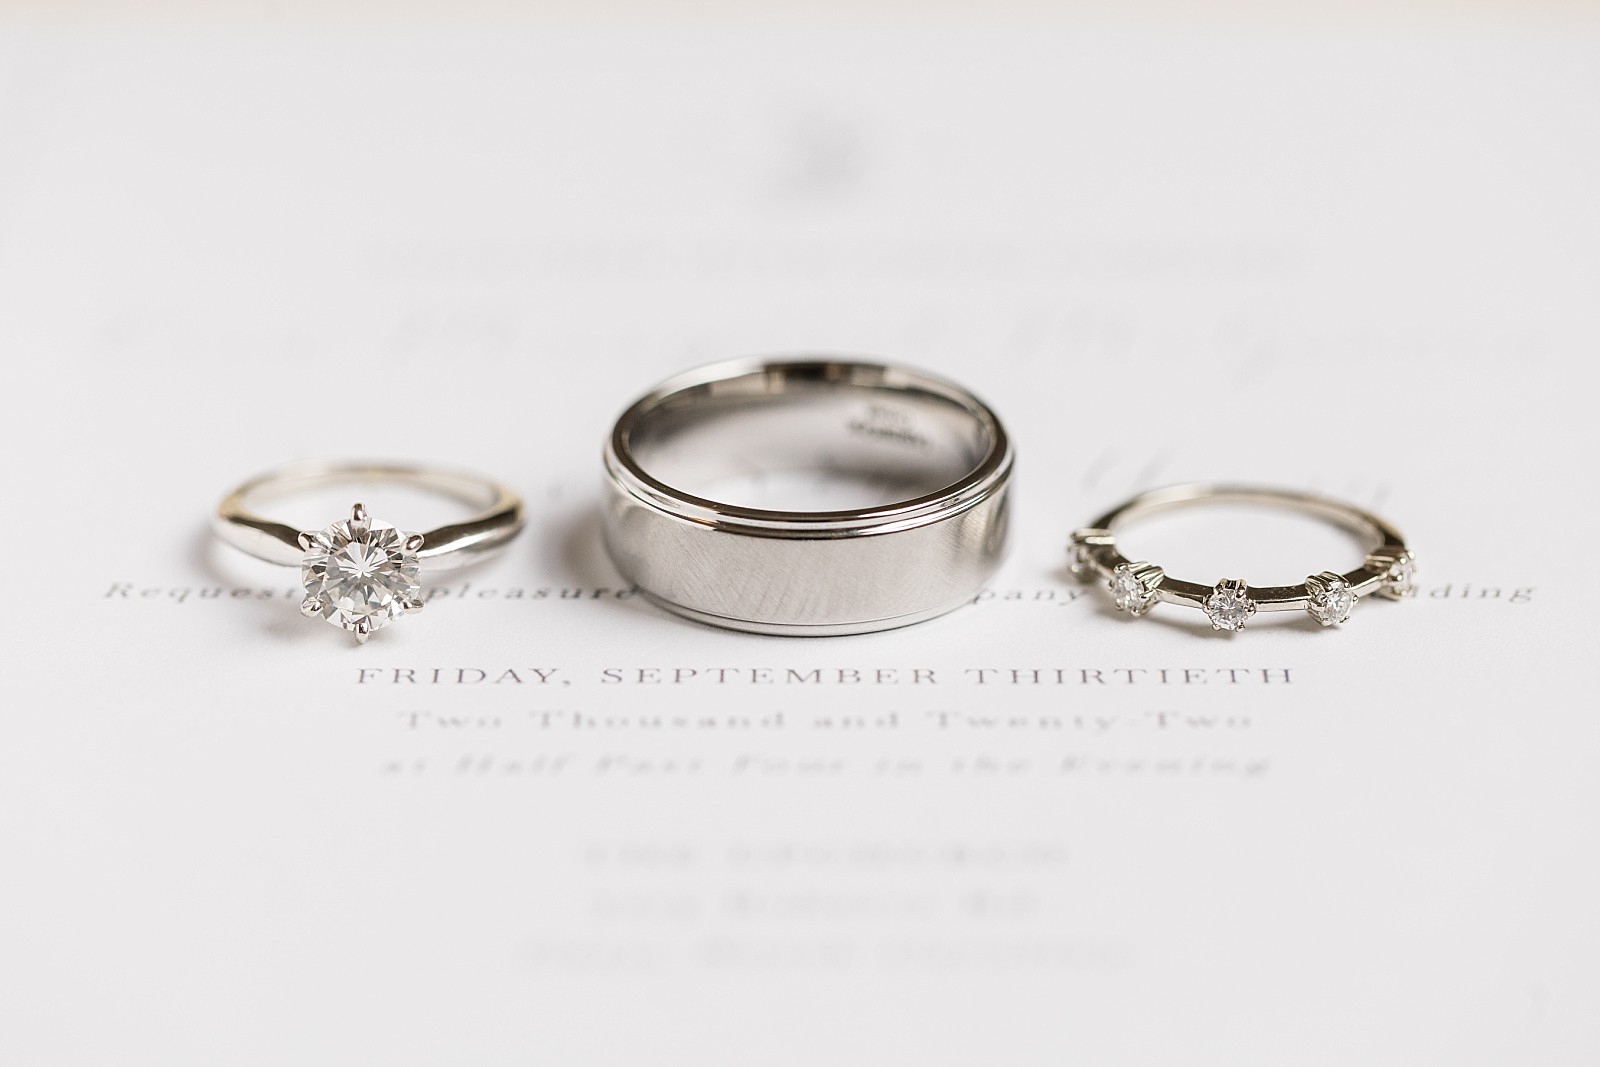 Wedding bands for fall wedding at The Upchurch in Cary NC | Raleigh NC Wedding Photography